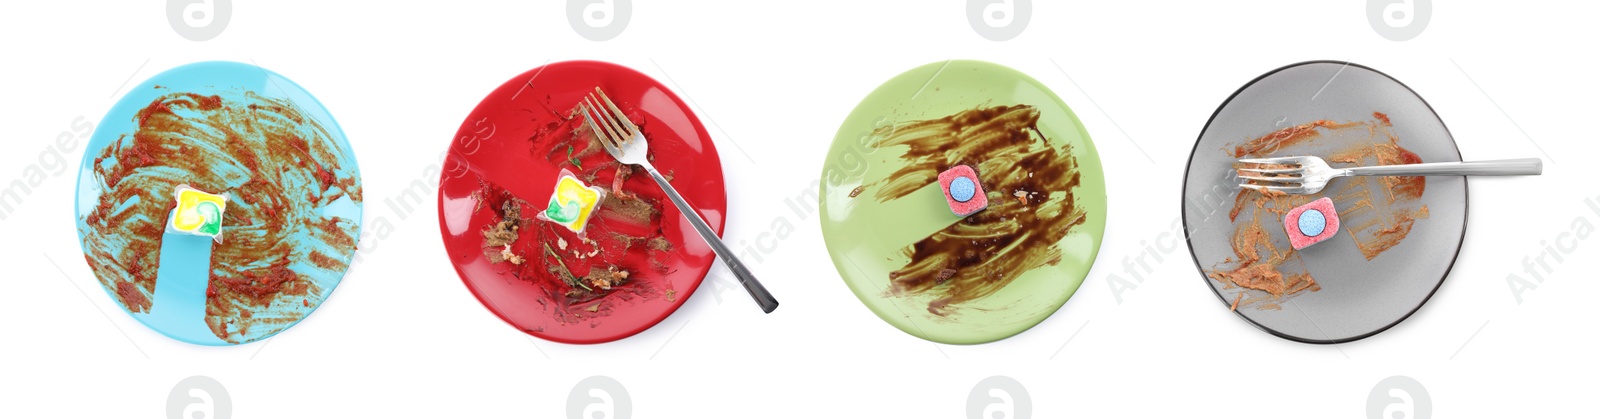 Image of Top view of dirty plates with dishwasher detergent tablets and gel capsules on white background, collage. Banner design